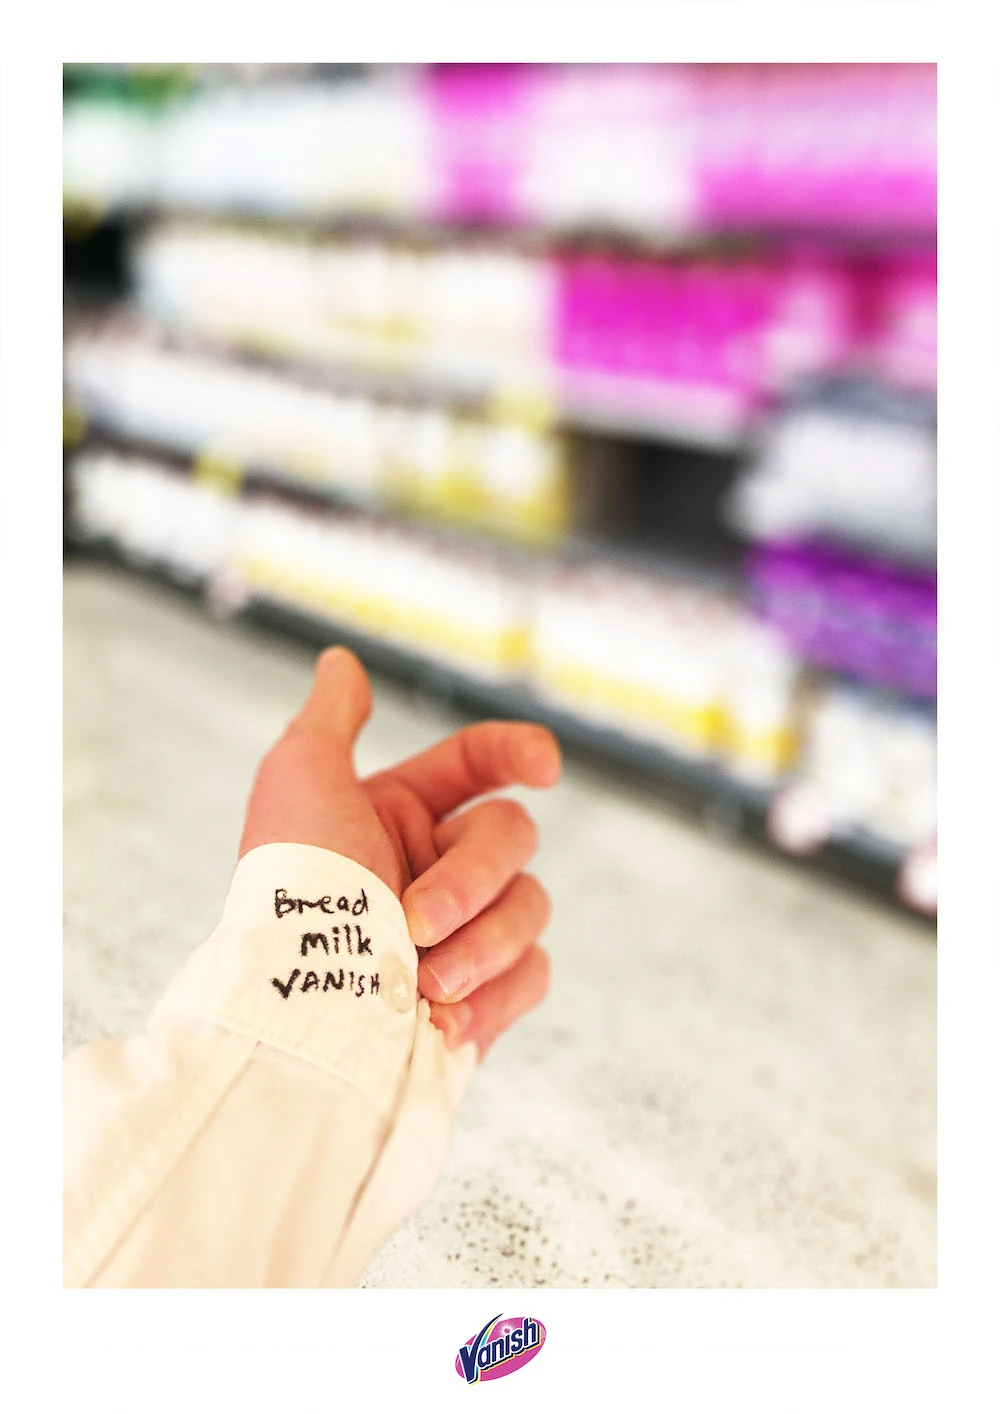 a photo of a shopping list written on someone's sleeve